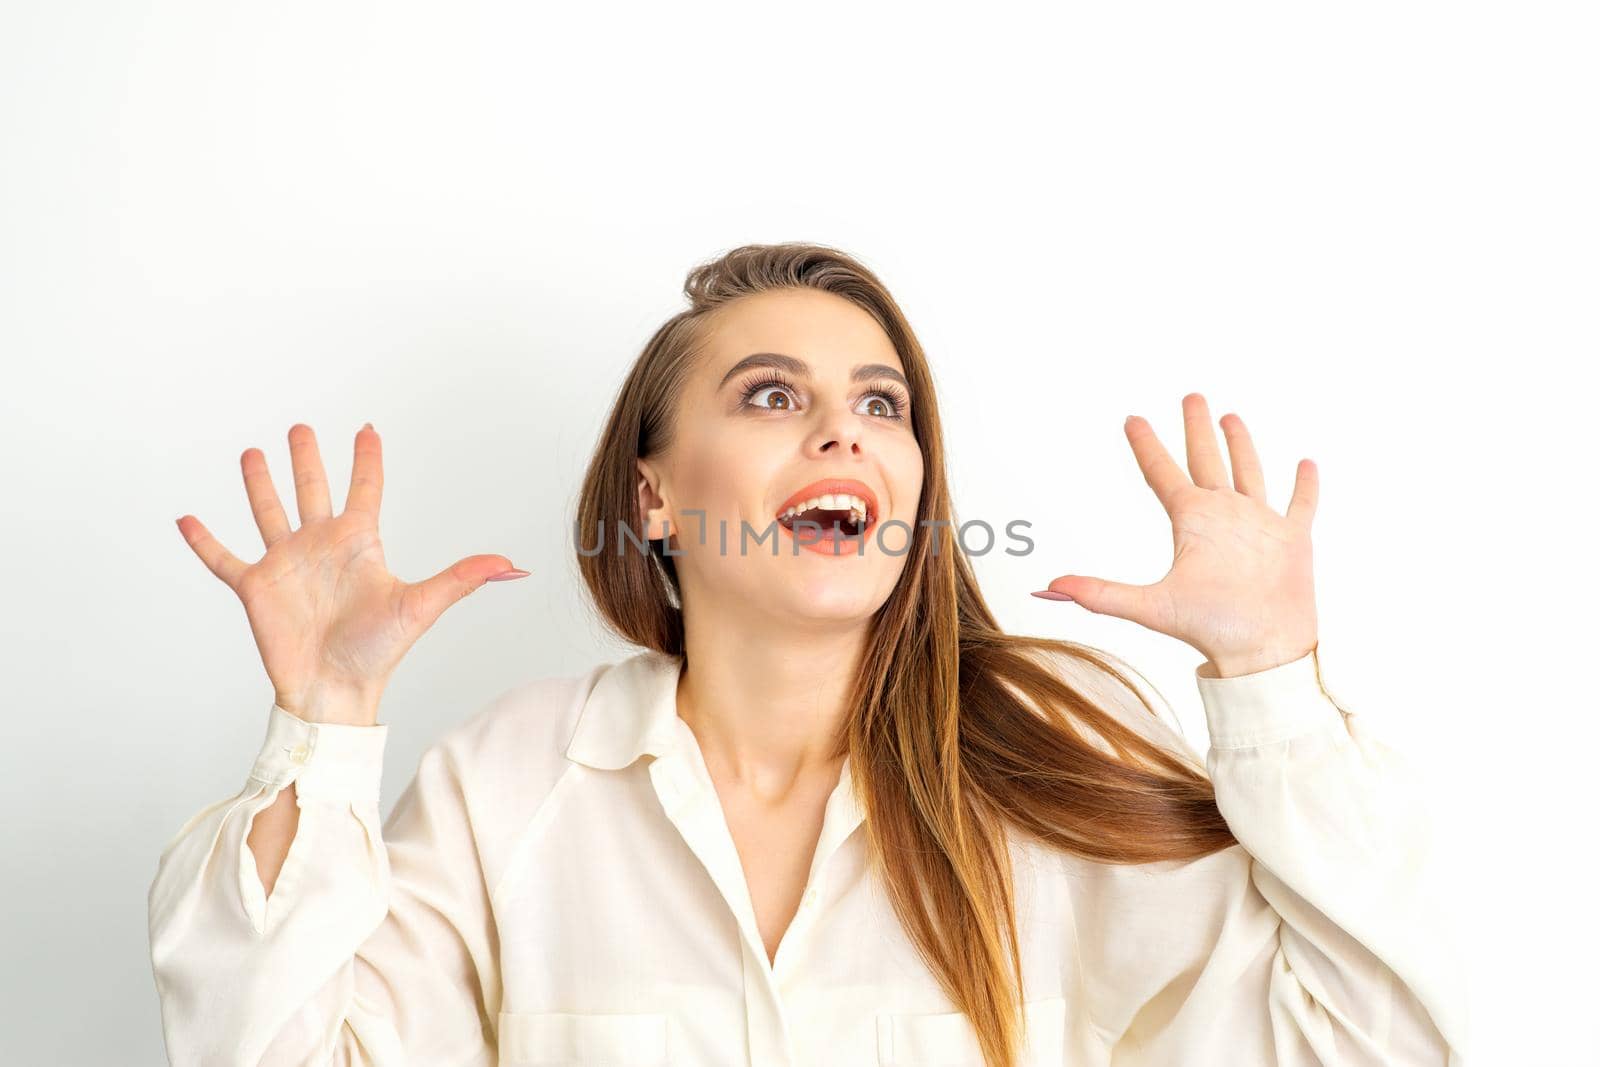 Portrait of young caucasian woman wearing white shirt raises hands and laughs positively with open mouth looking up against a white background. by okskukuruza